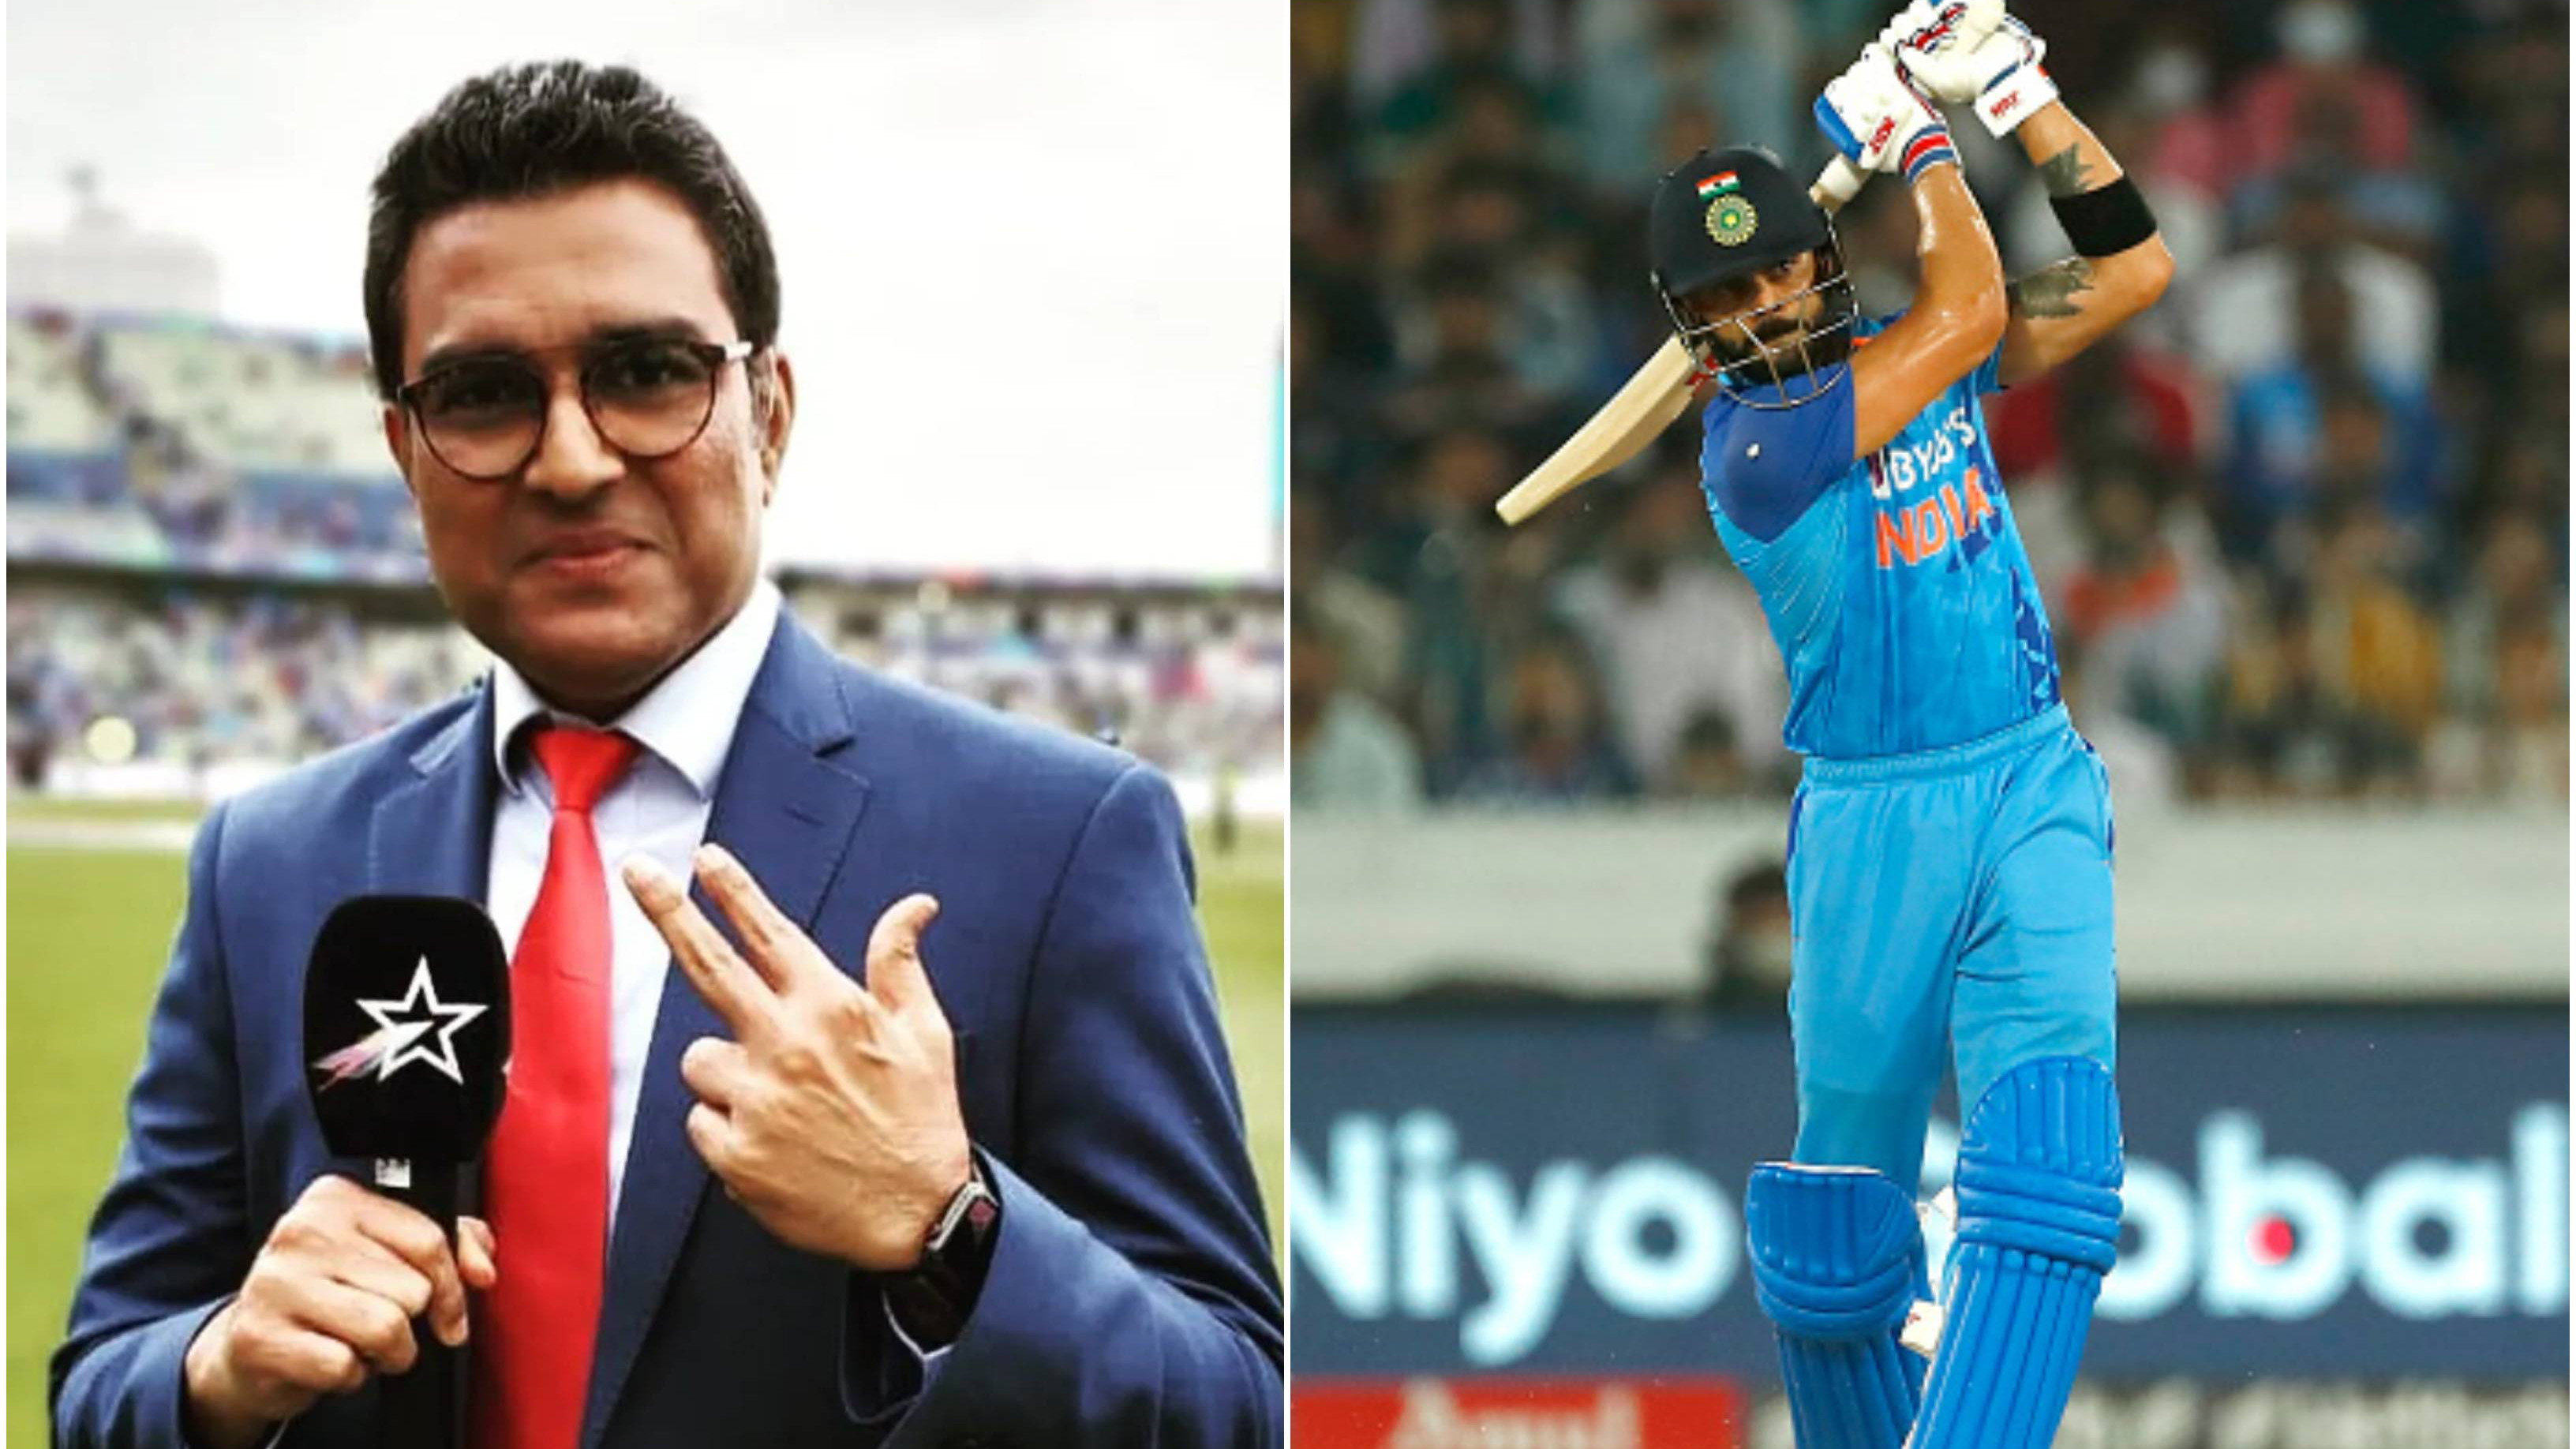 “The power game is back,” Manjrekar says Kohli’s form augurs well for Team India heading into T20 World Cup